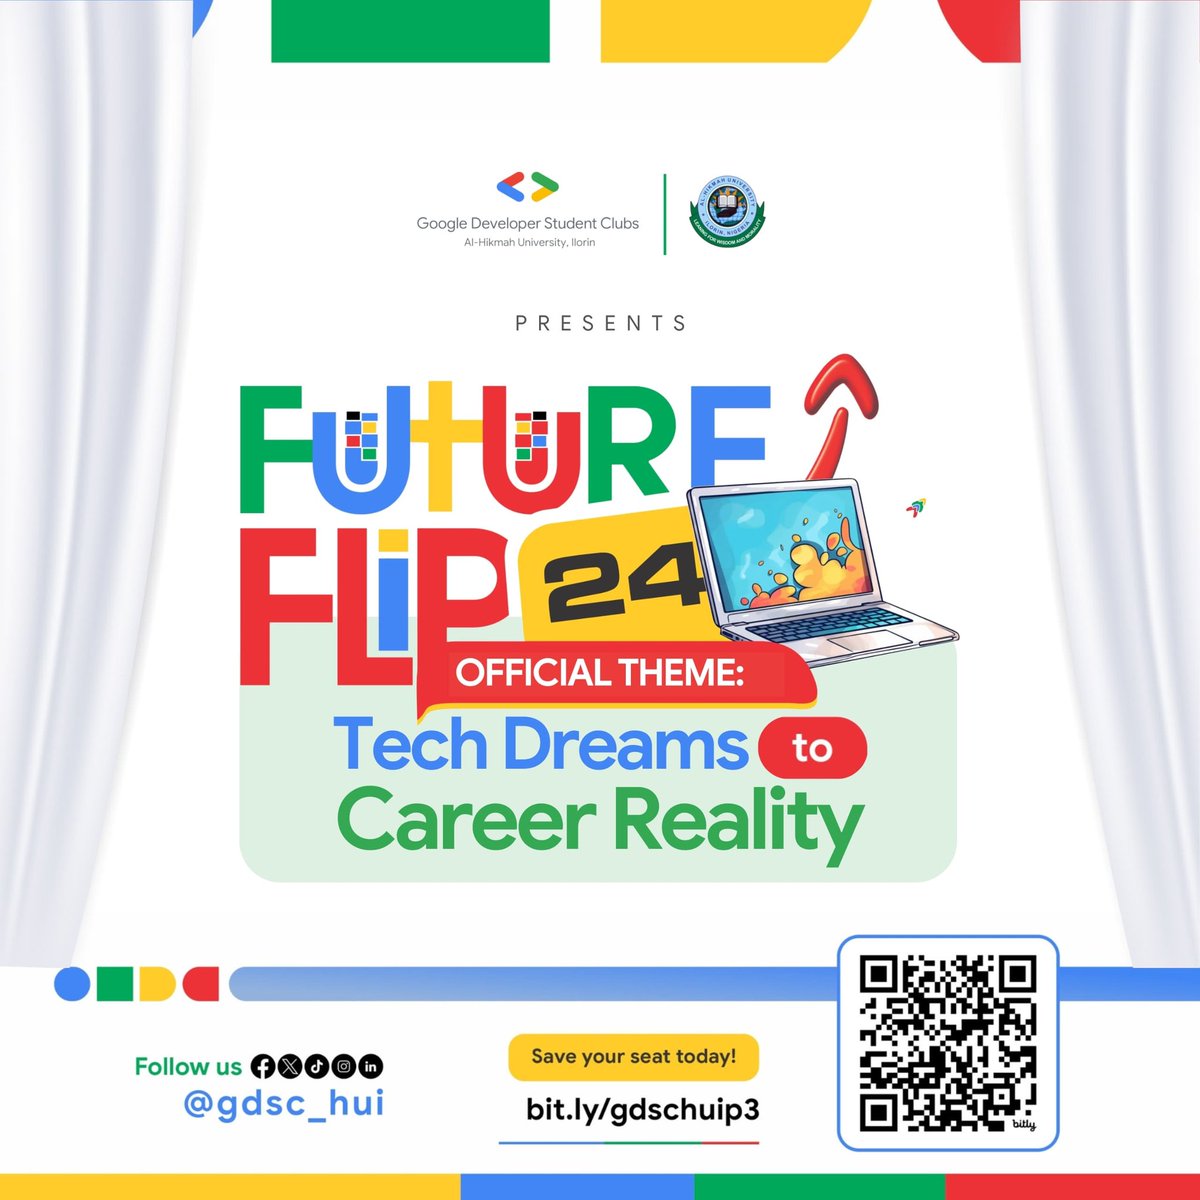 Stop dreaming fam! 🚫✋ Your career reality is about to get a major upgrade! 🚀 Get ready to flip the script at #FutureFlip24! 🎉 Be a part of this epic journey from tech dreams to career success! 💼 RSVP: bit.ly/gdschuip3 #FutureFlip24 #GDSCHUI #DevelopersStudentsClub